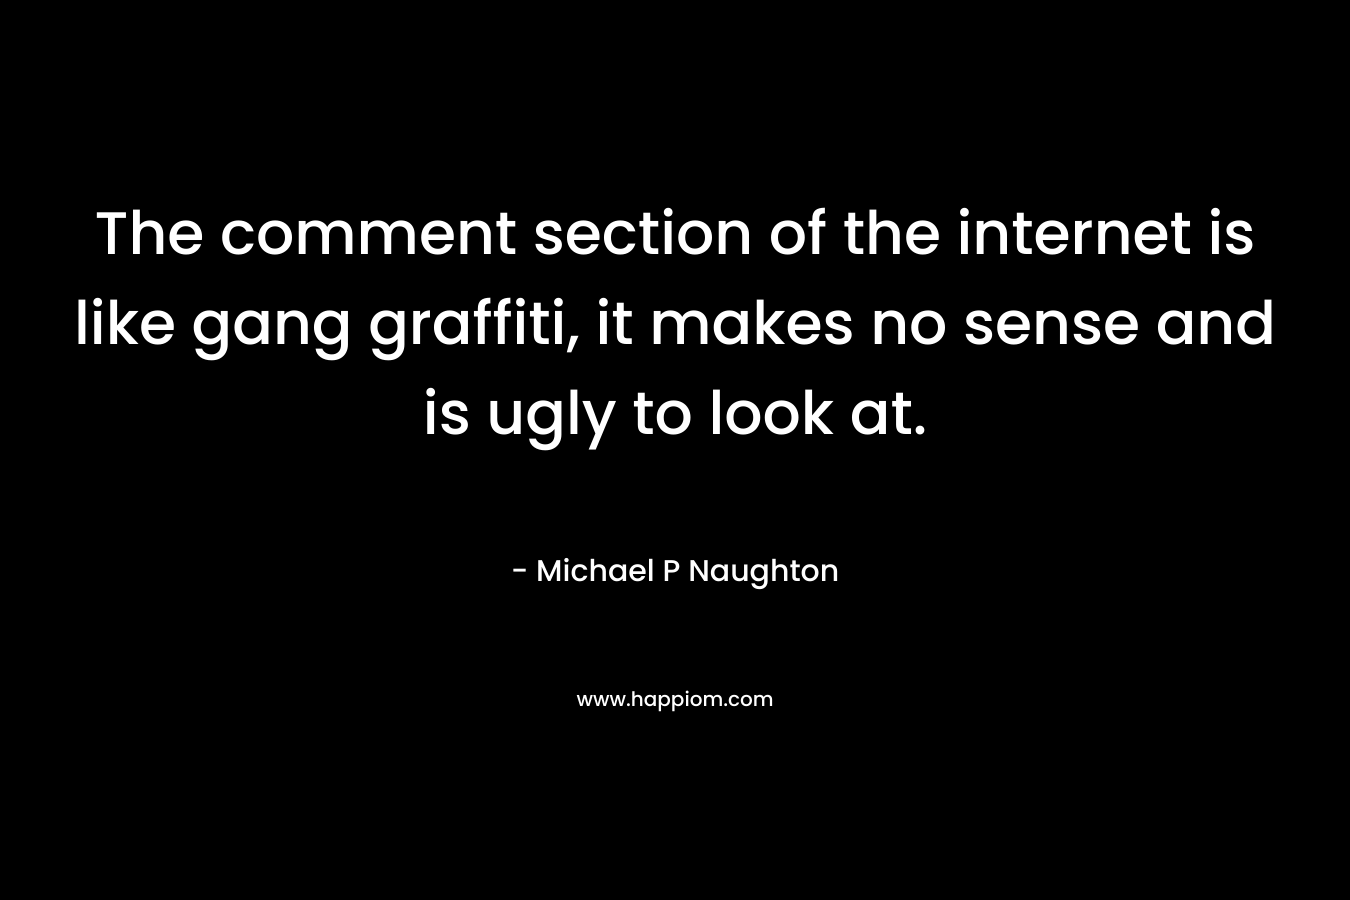 The comment section of the internet is like gang graffiti, it makes no sense and is ugly to look at. – Michael P Naughton